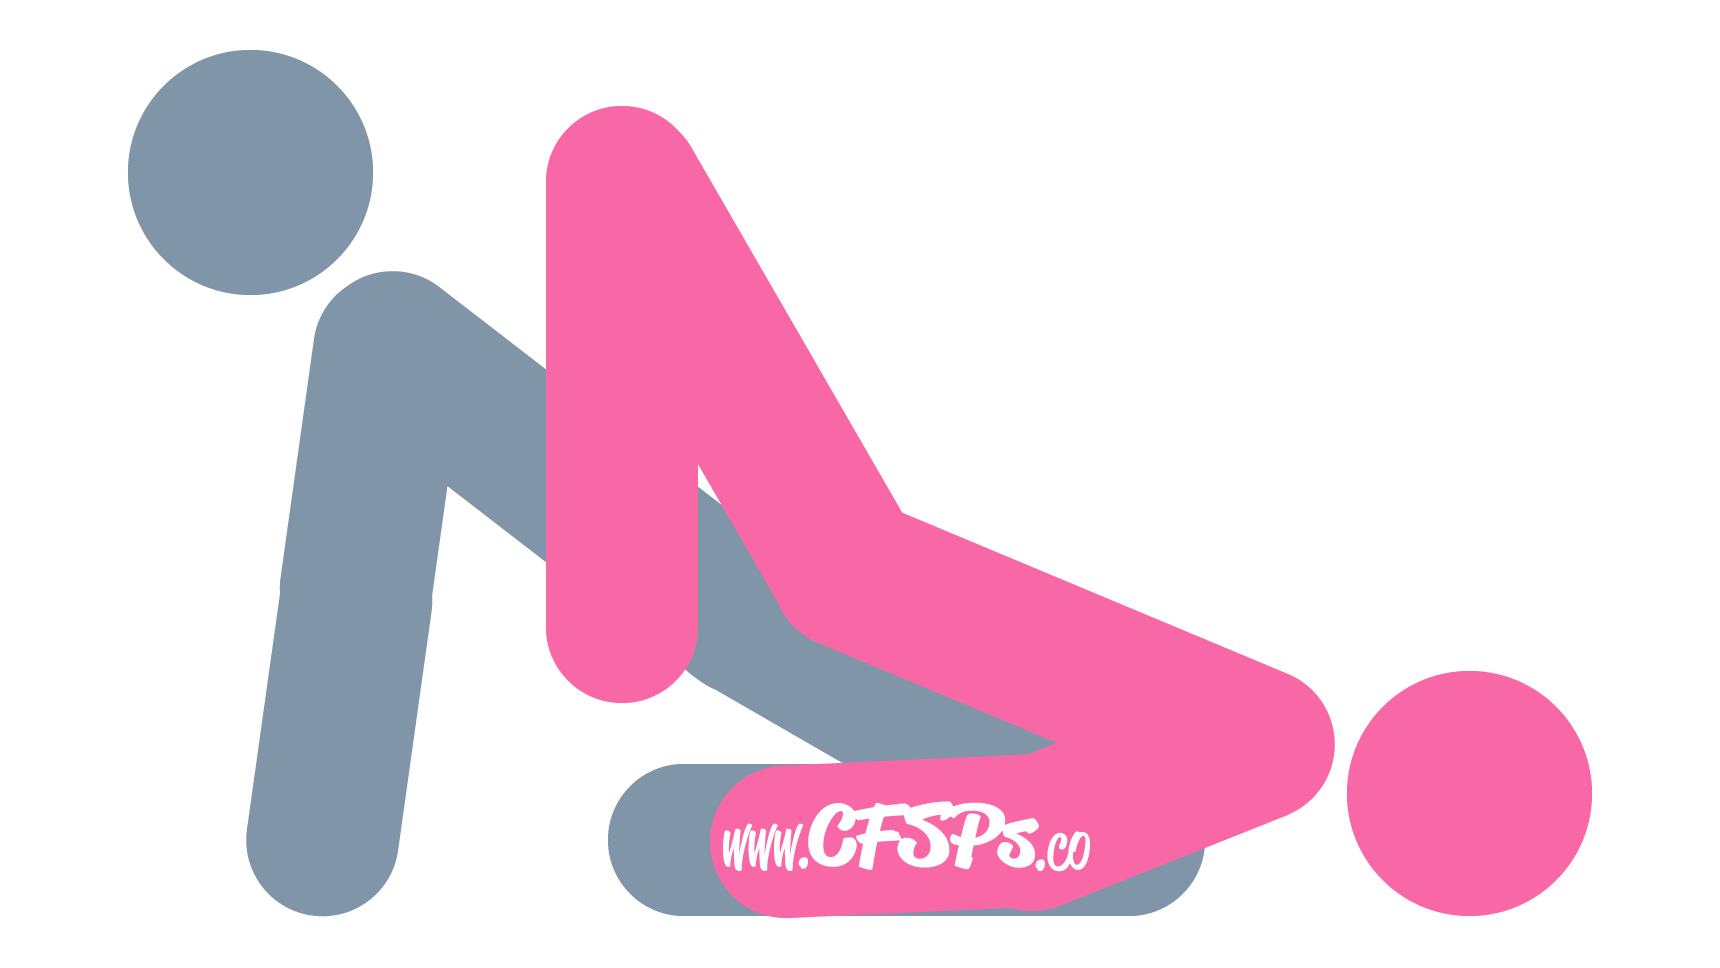 An illustration of the Slip sex position. This picture demonstrates how Slip is a kneeling, woman-on-top sex position with g-spot stimulation.